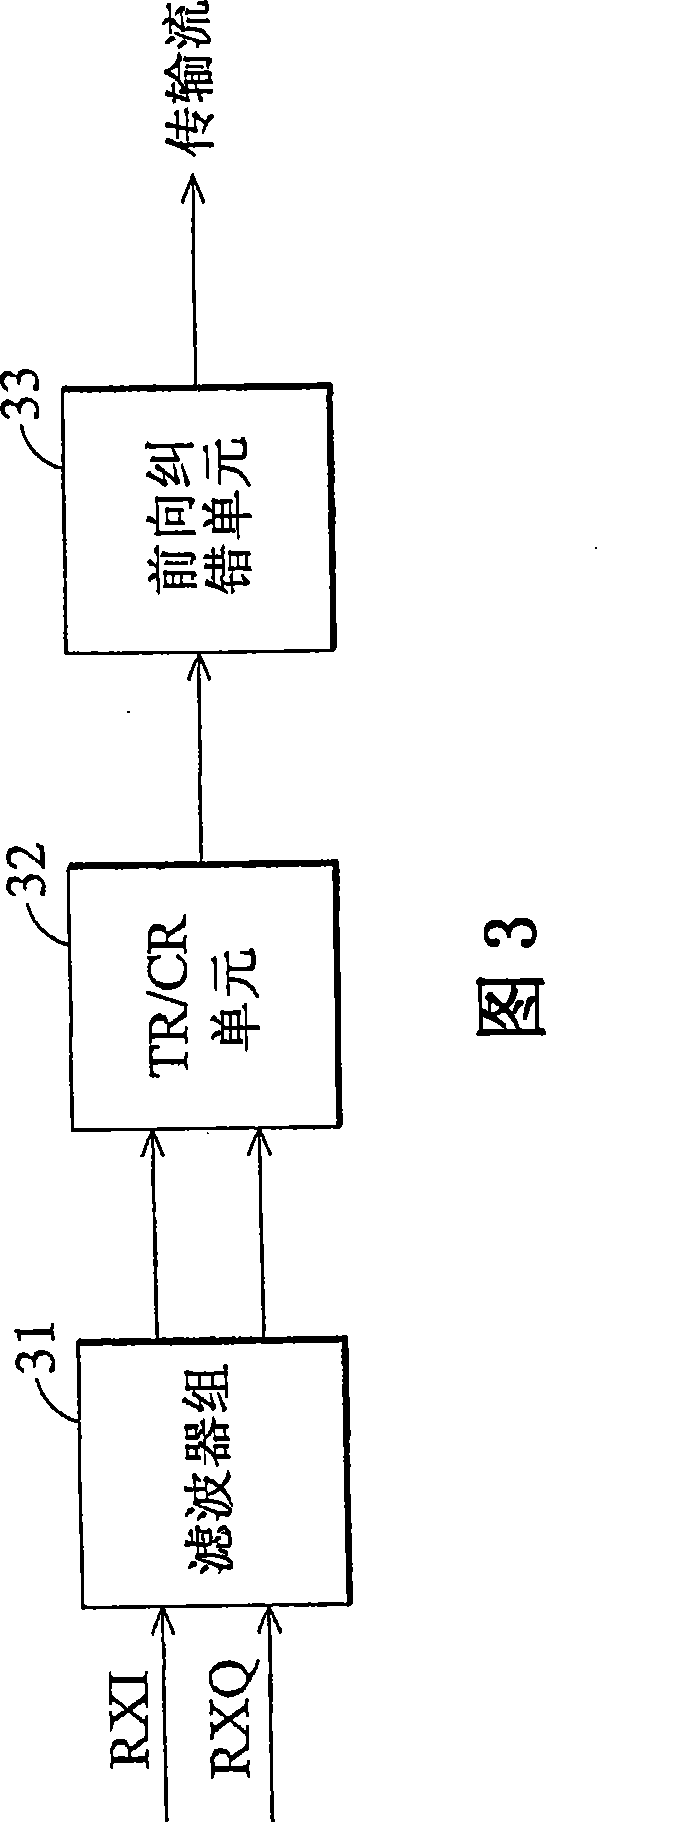 DVB-S receiver and method for displaying quality and intensity index signals